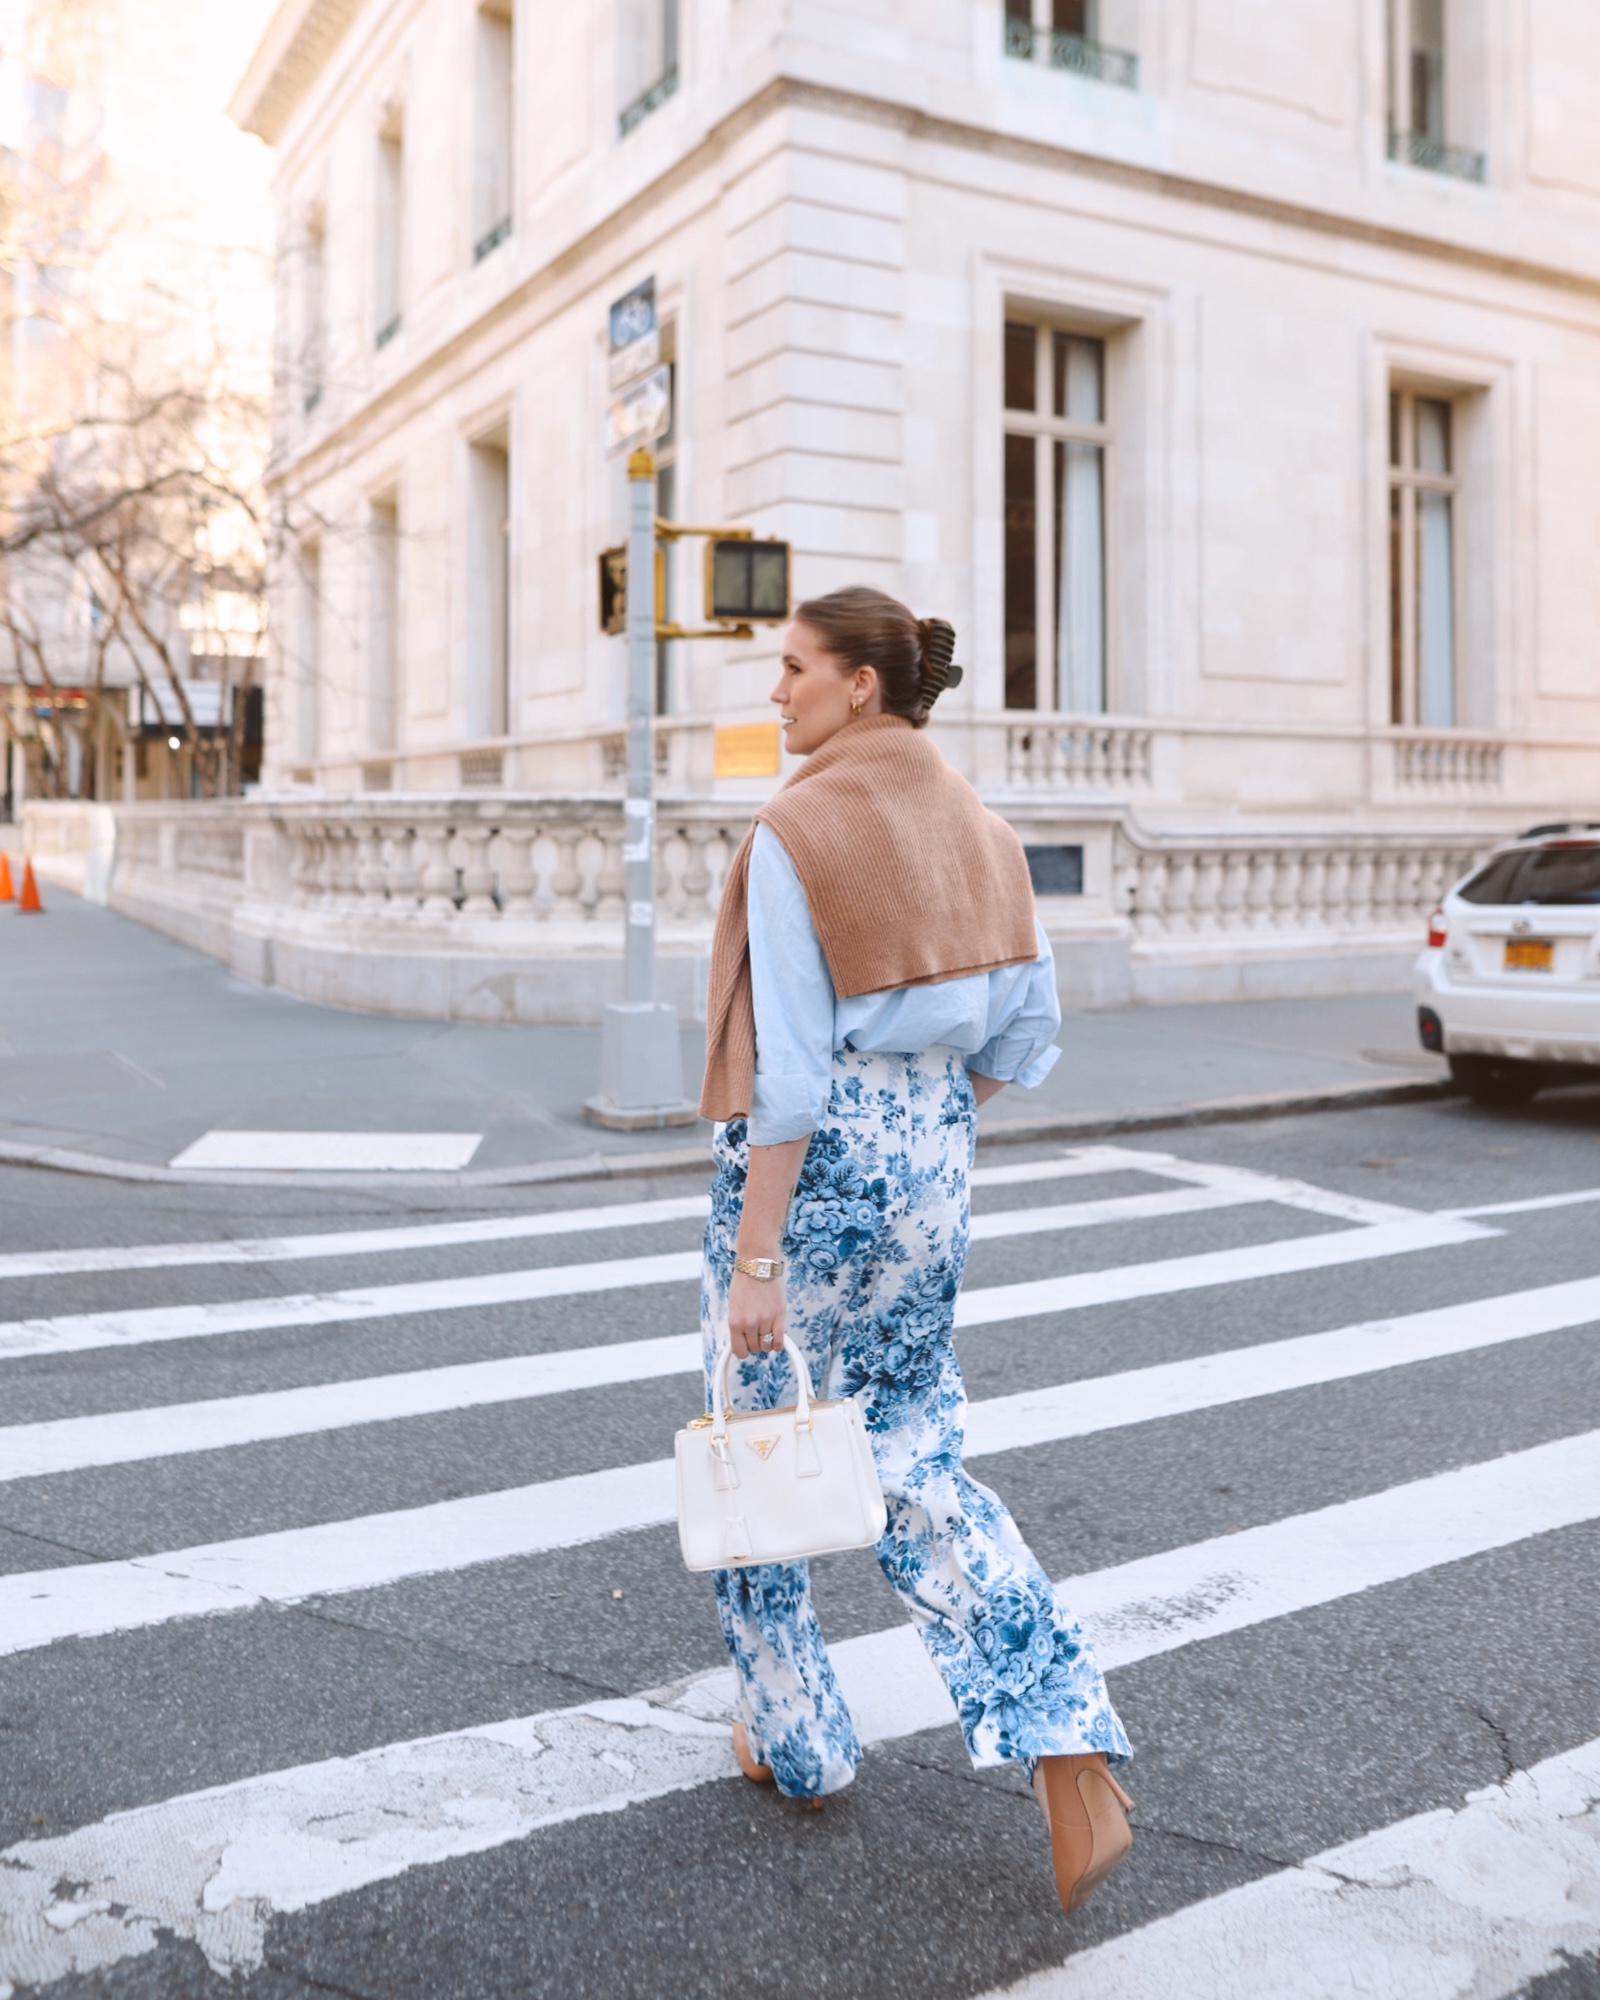 Anna wearing a blue and white outfit walking across the street.